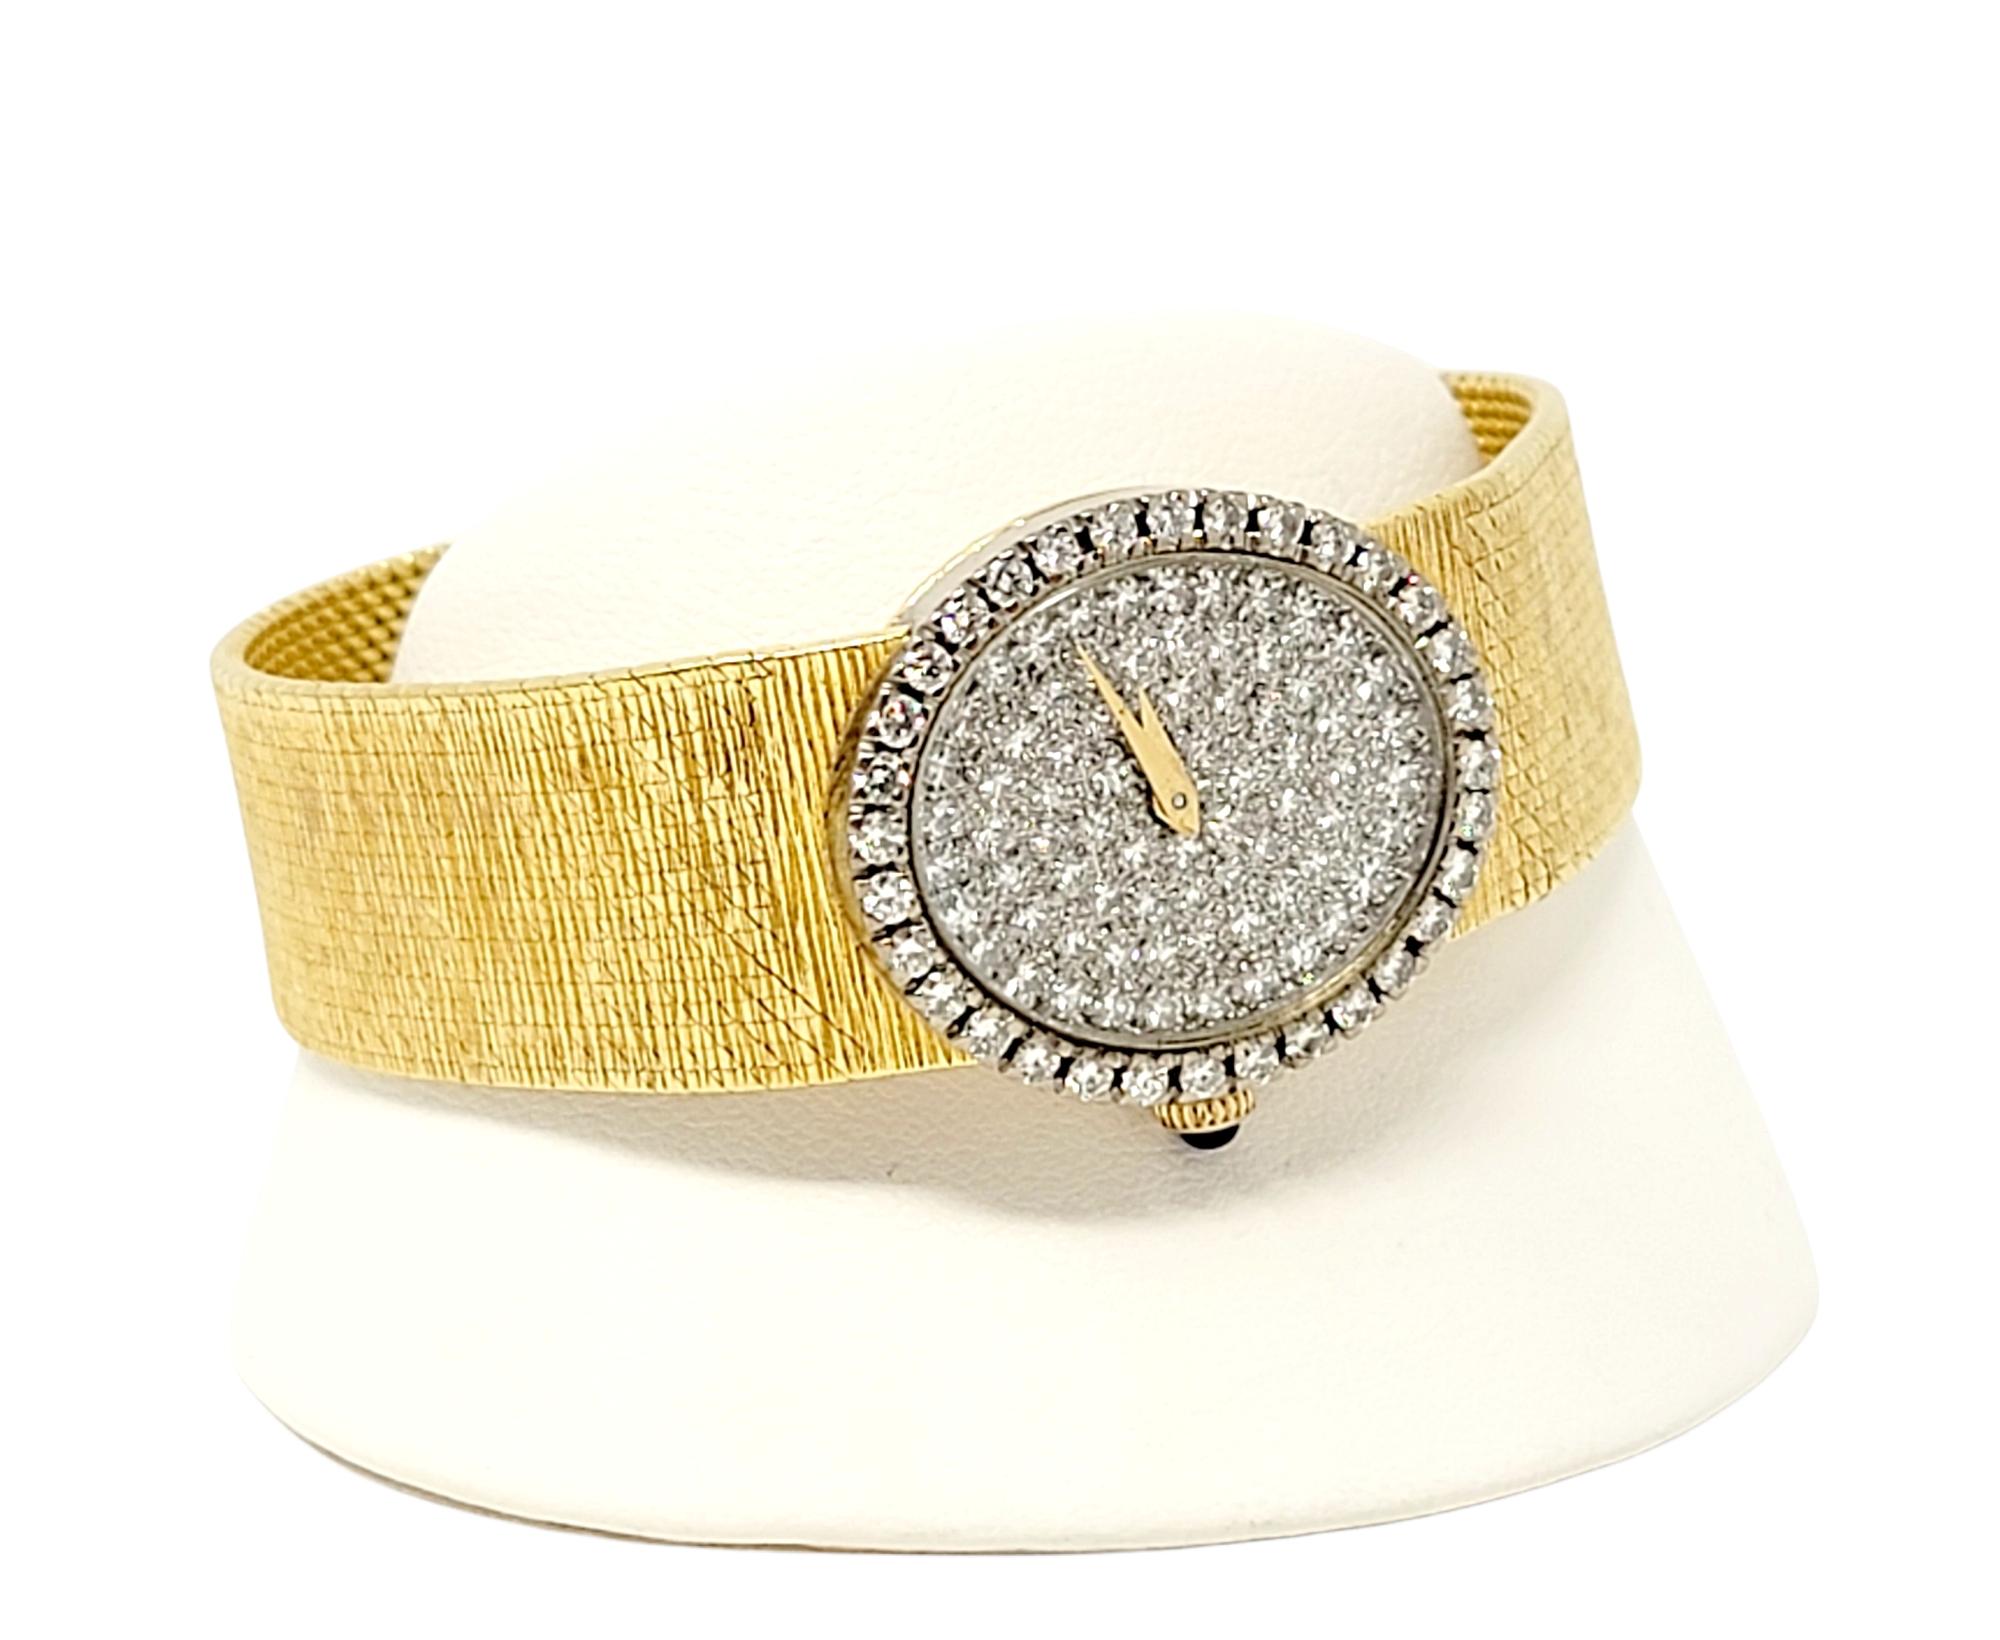 Luxurious vintage Baume & Mercier ladies wristwatch embellished with 1.28 carats of glittering natural diamonds. The flexible textured 18 karat yellow gold bracelet gently wraps the wrist while the sparkling diamond embellished dial shimmers and